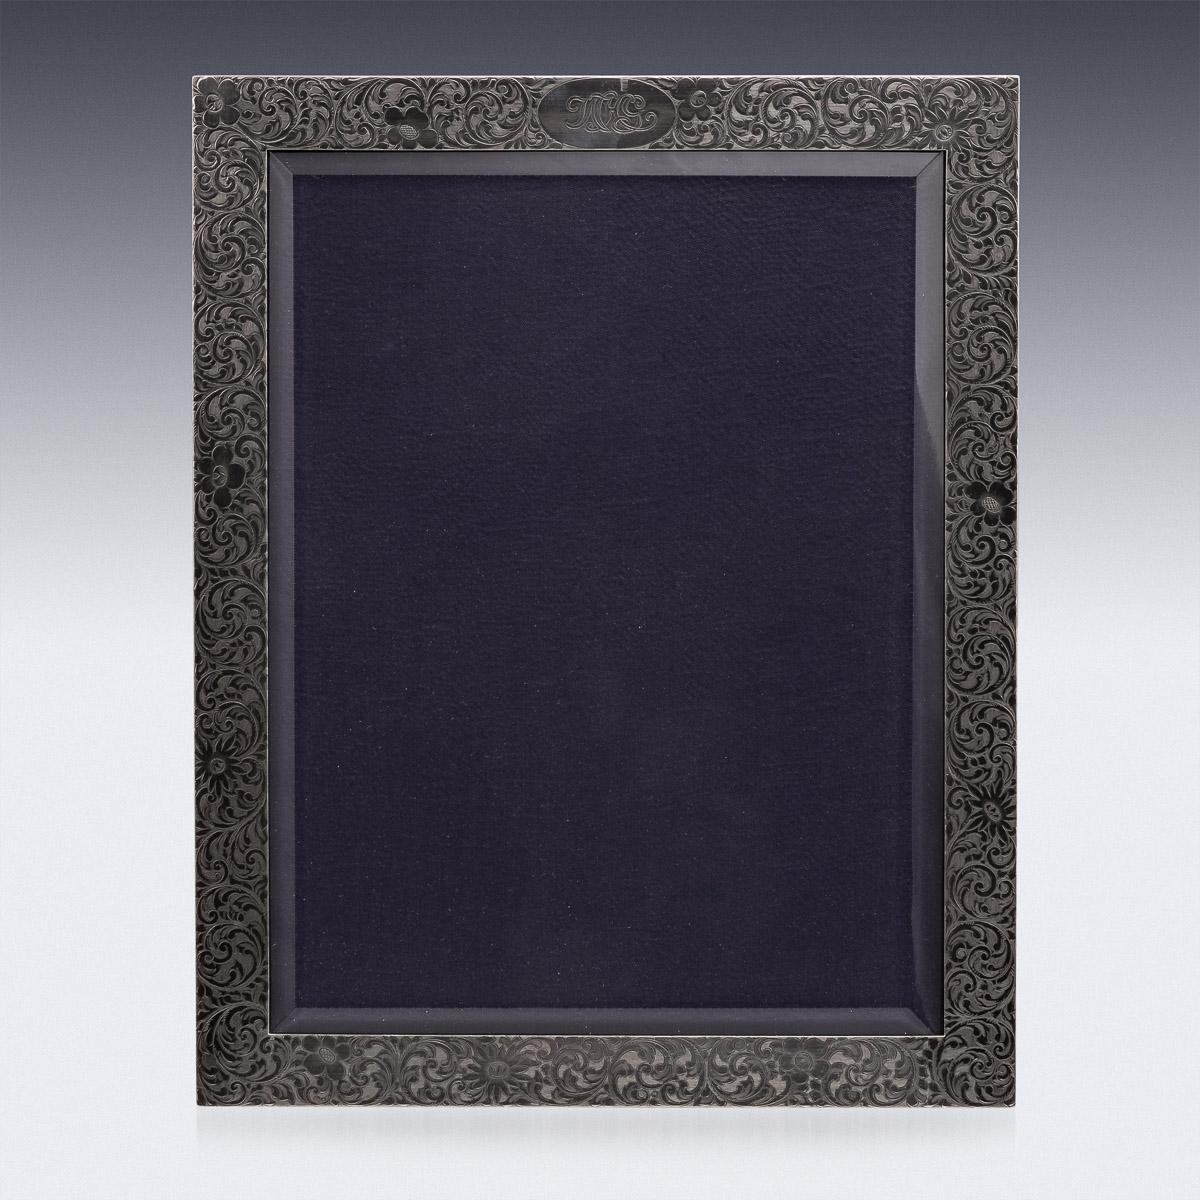 Antique early 20th century American solid silver photograph frame, particularly large, engraved with scrolls and flowers, the top with the initials WHG, mounted on a wood back with easel support, front with beveled glass to protect the photo.